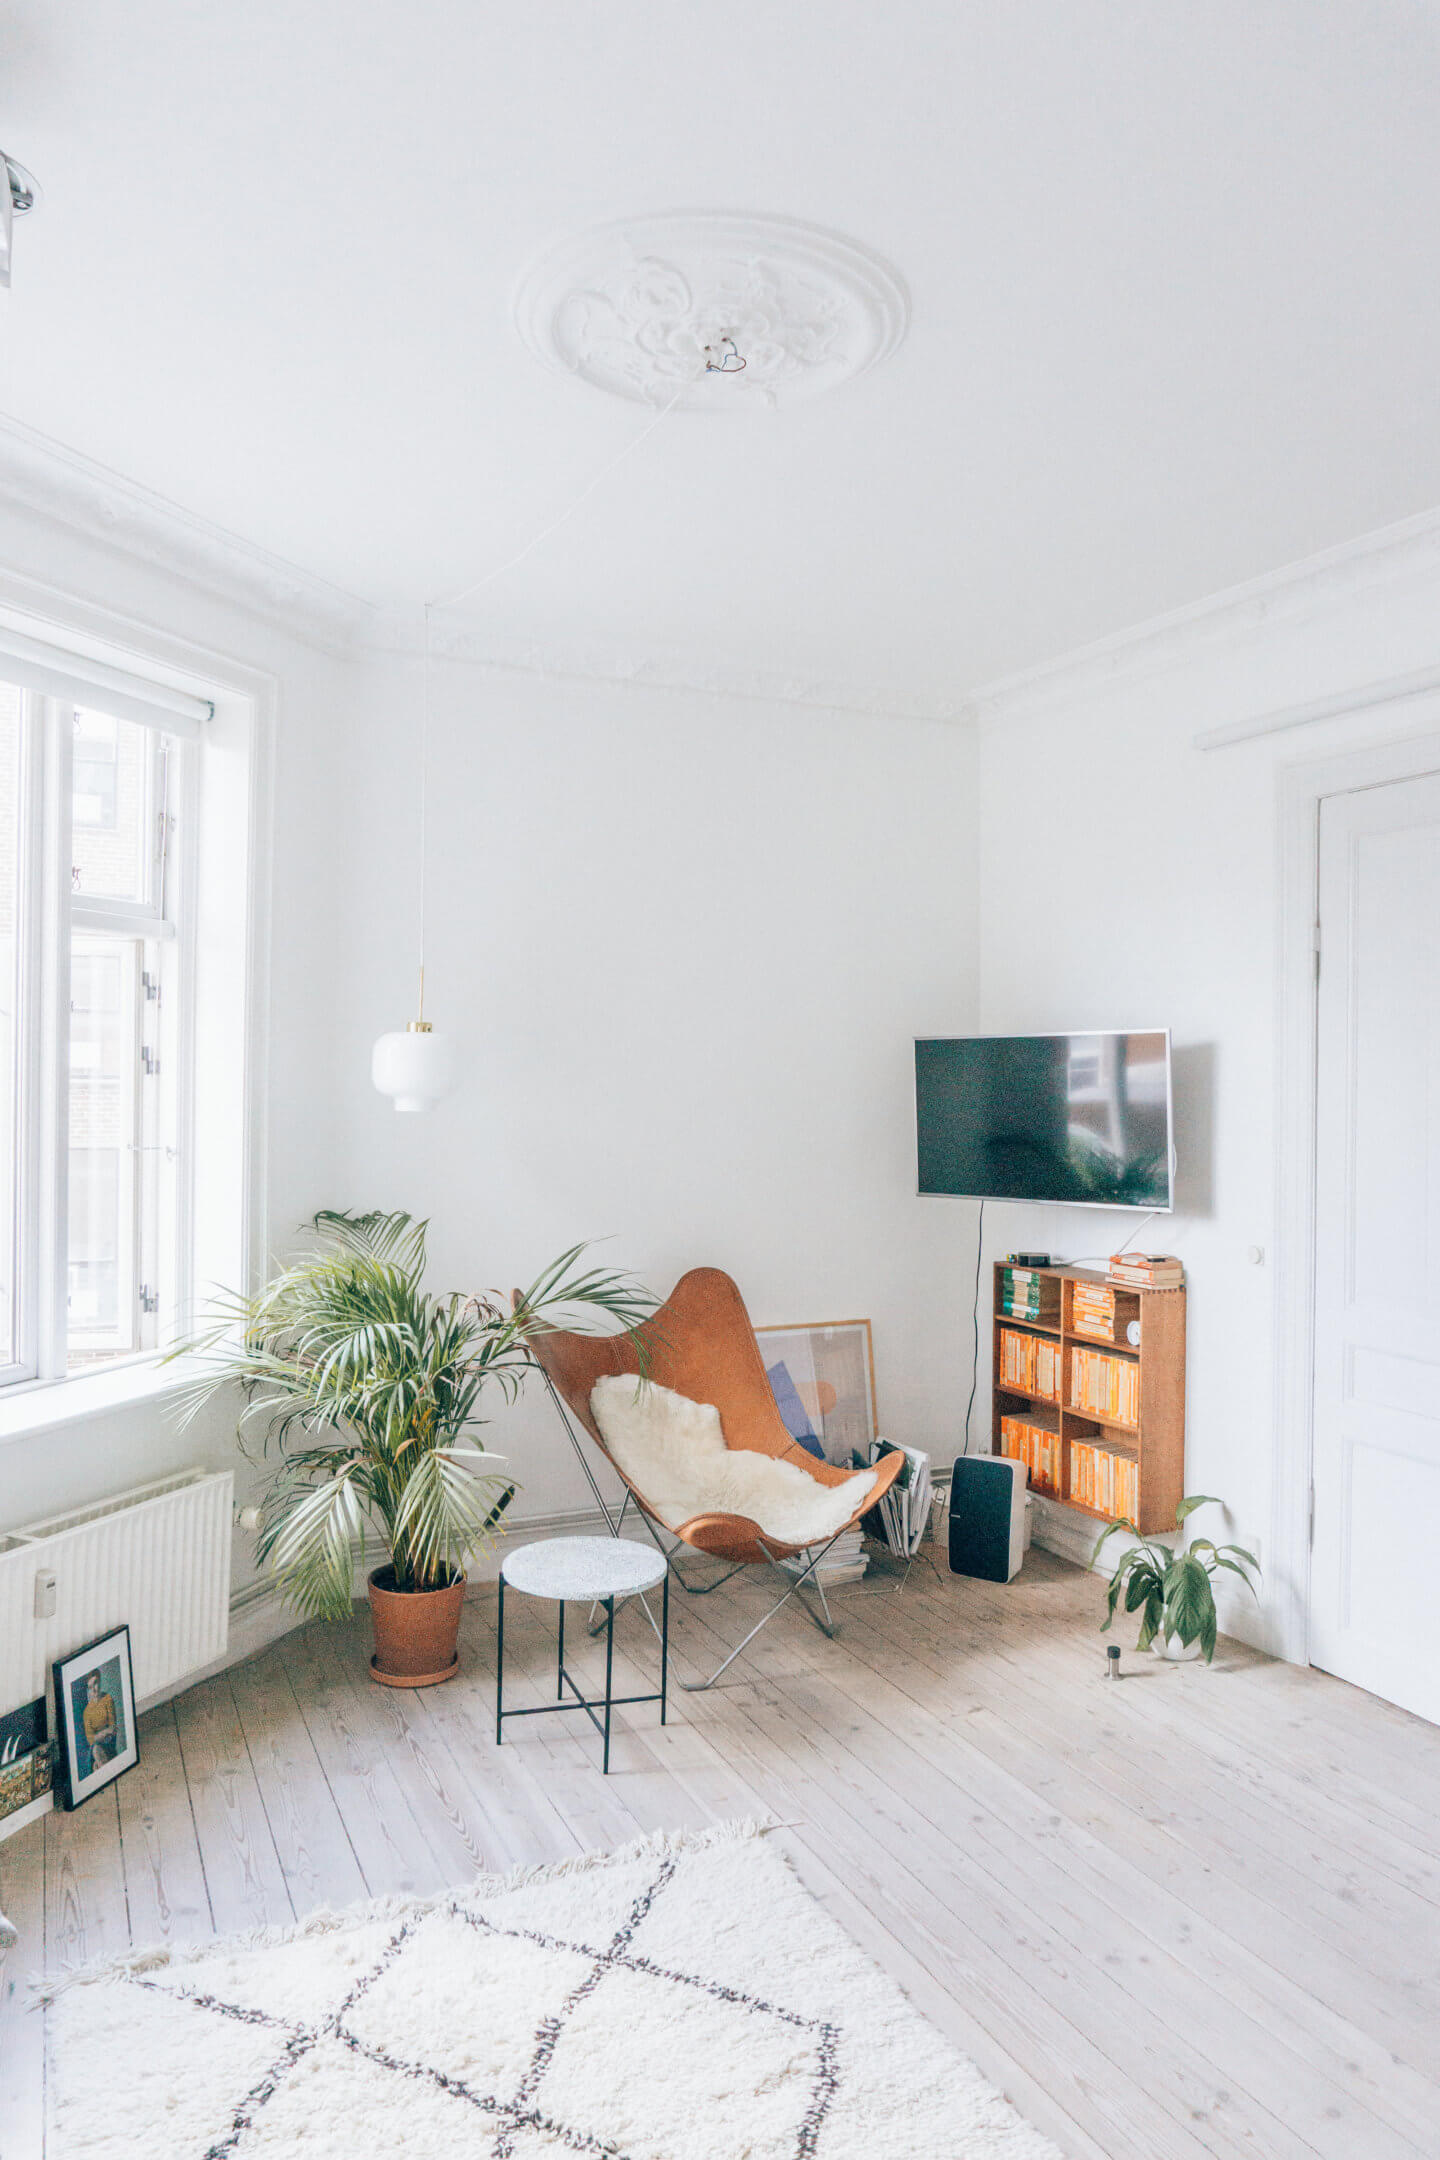 The living room of our Copenhagen Airbnb